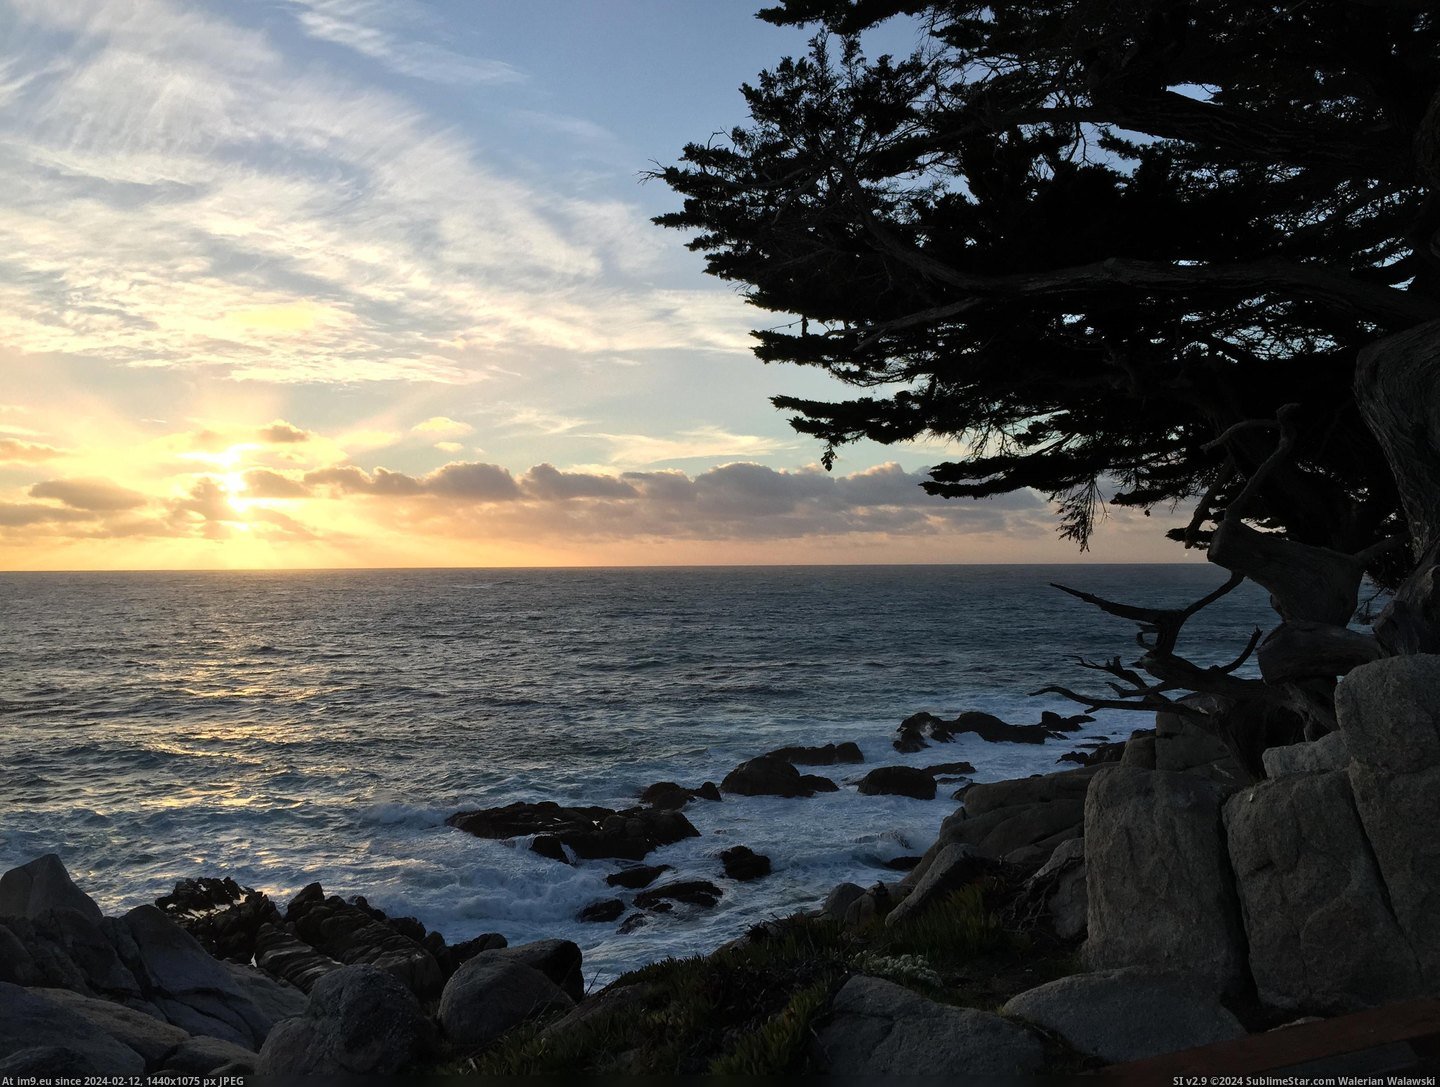 #Sunset #3264x2448 #Cypress #Drive #Mile [Earthporn] Cypress Sunset - 17 Mile Drive, CA 2015 [3264x2448] Pic. (Image of album My r/EARTHPORN favs))